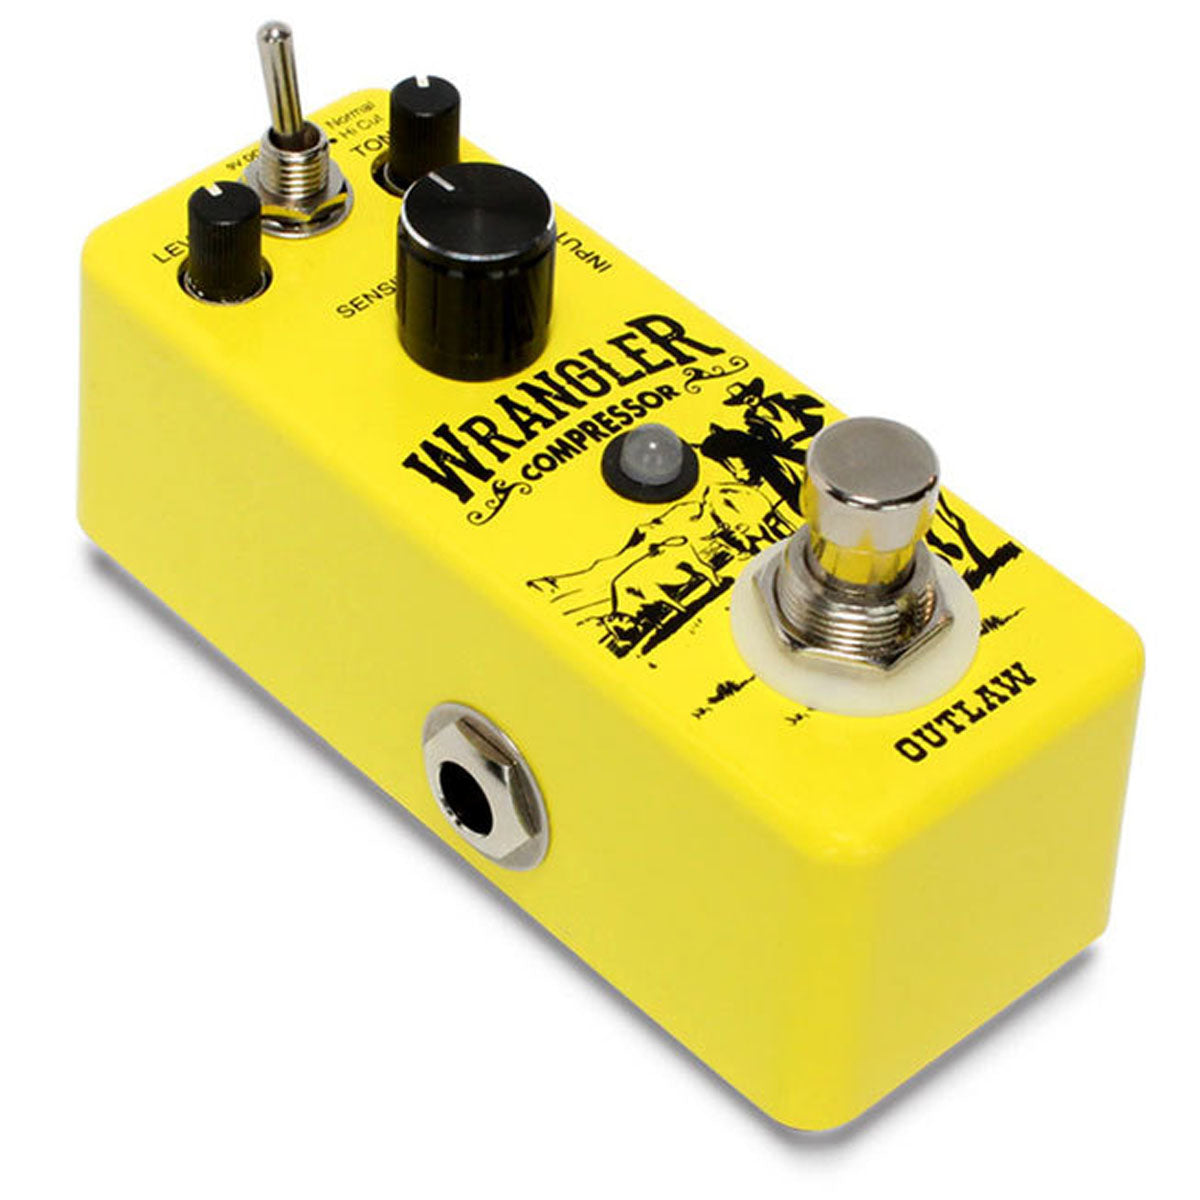 Outlaw Effects Wrangler Compressor Pedal